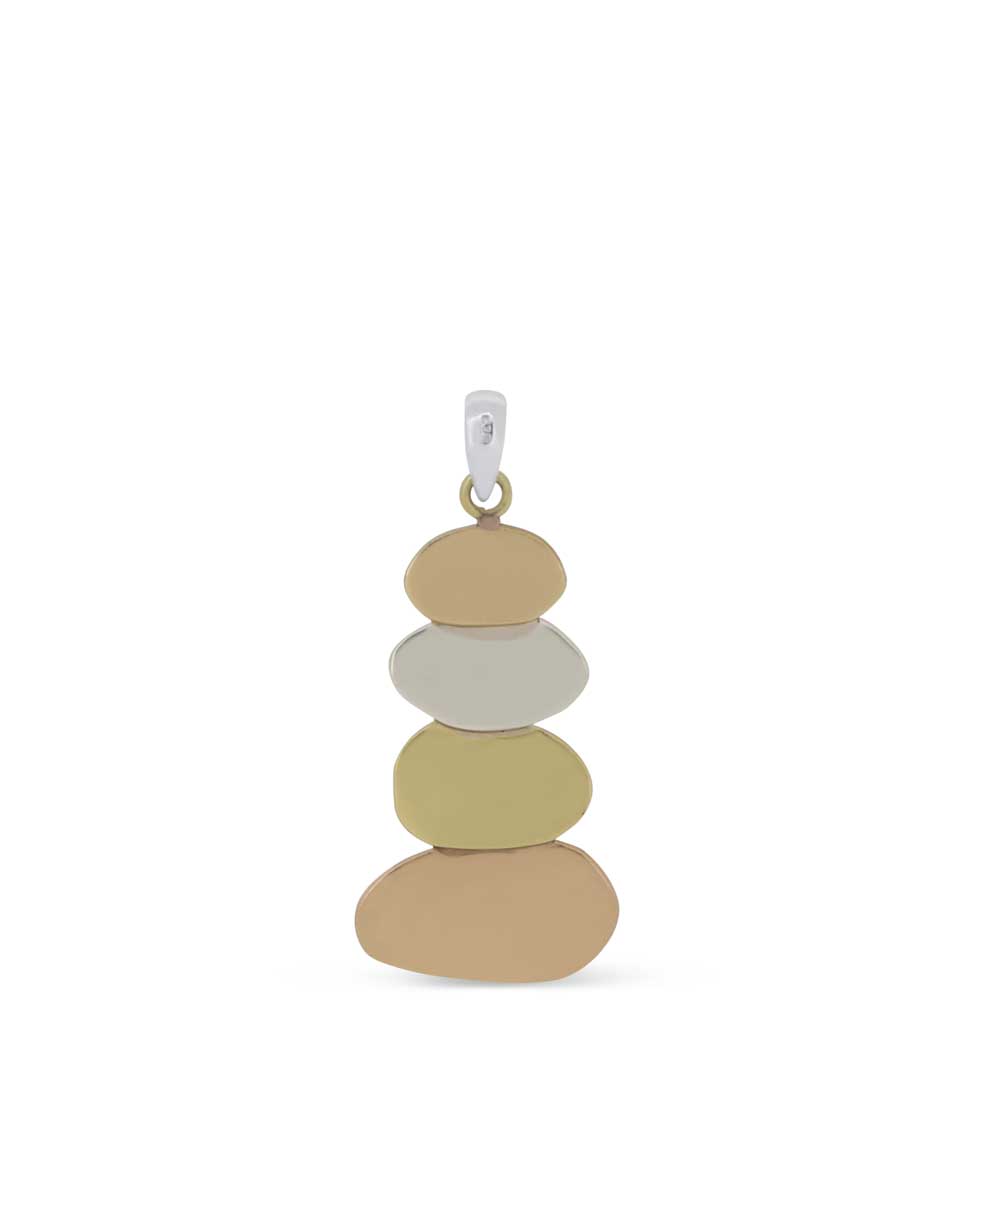 Mixed Metal Cairn Pendant: A Symbol of Guidance and Balance - Charms & Pendants